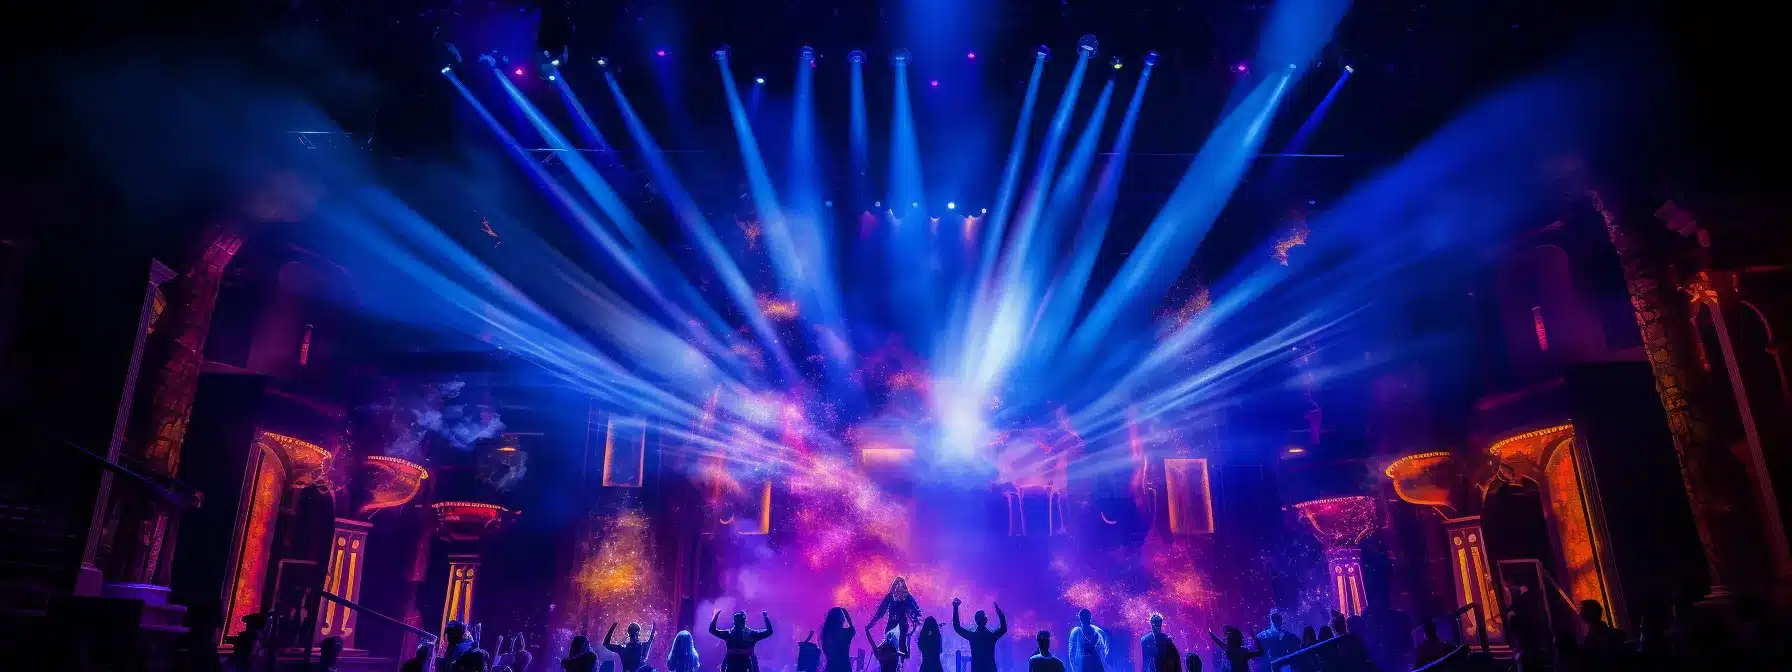 A Mesmerizing Broadway Show With Electrifying Performances Capturing The Attention Of The Audience, Leaving An Indelible Brand Awareness In Their Hearts.